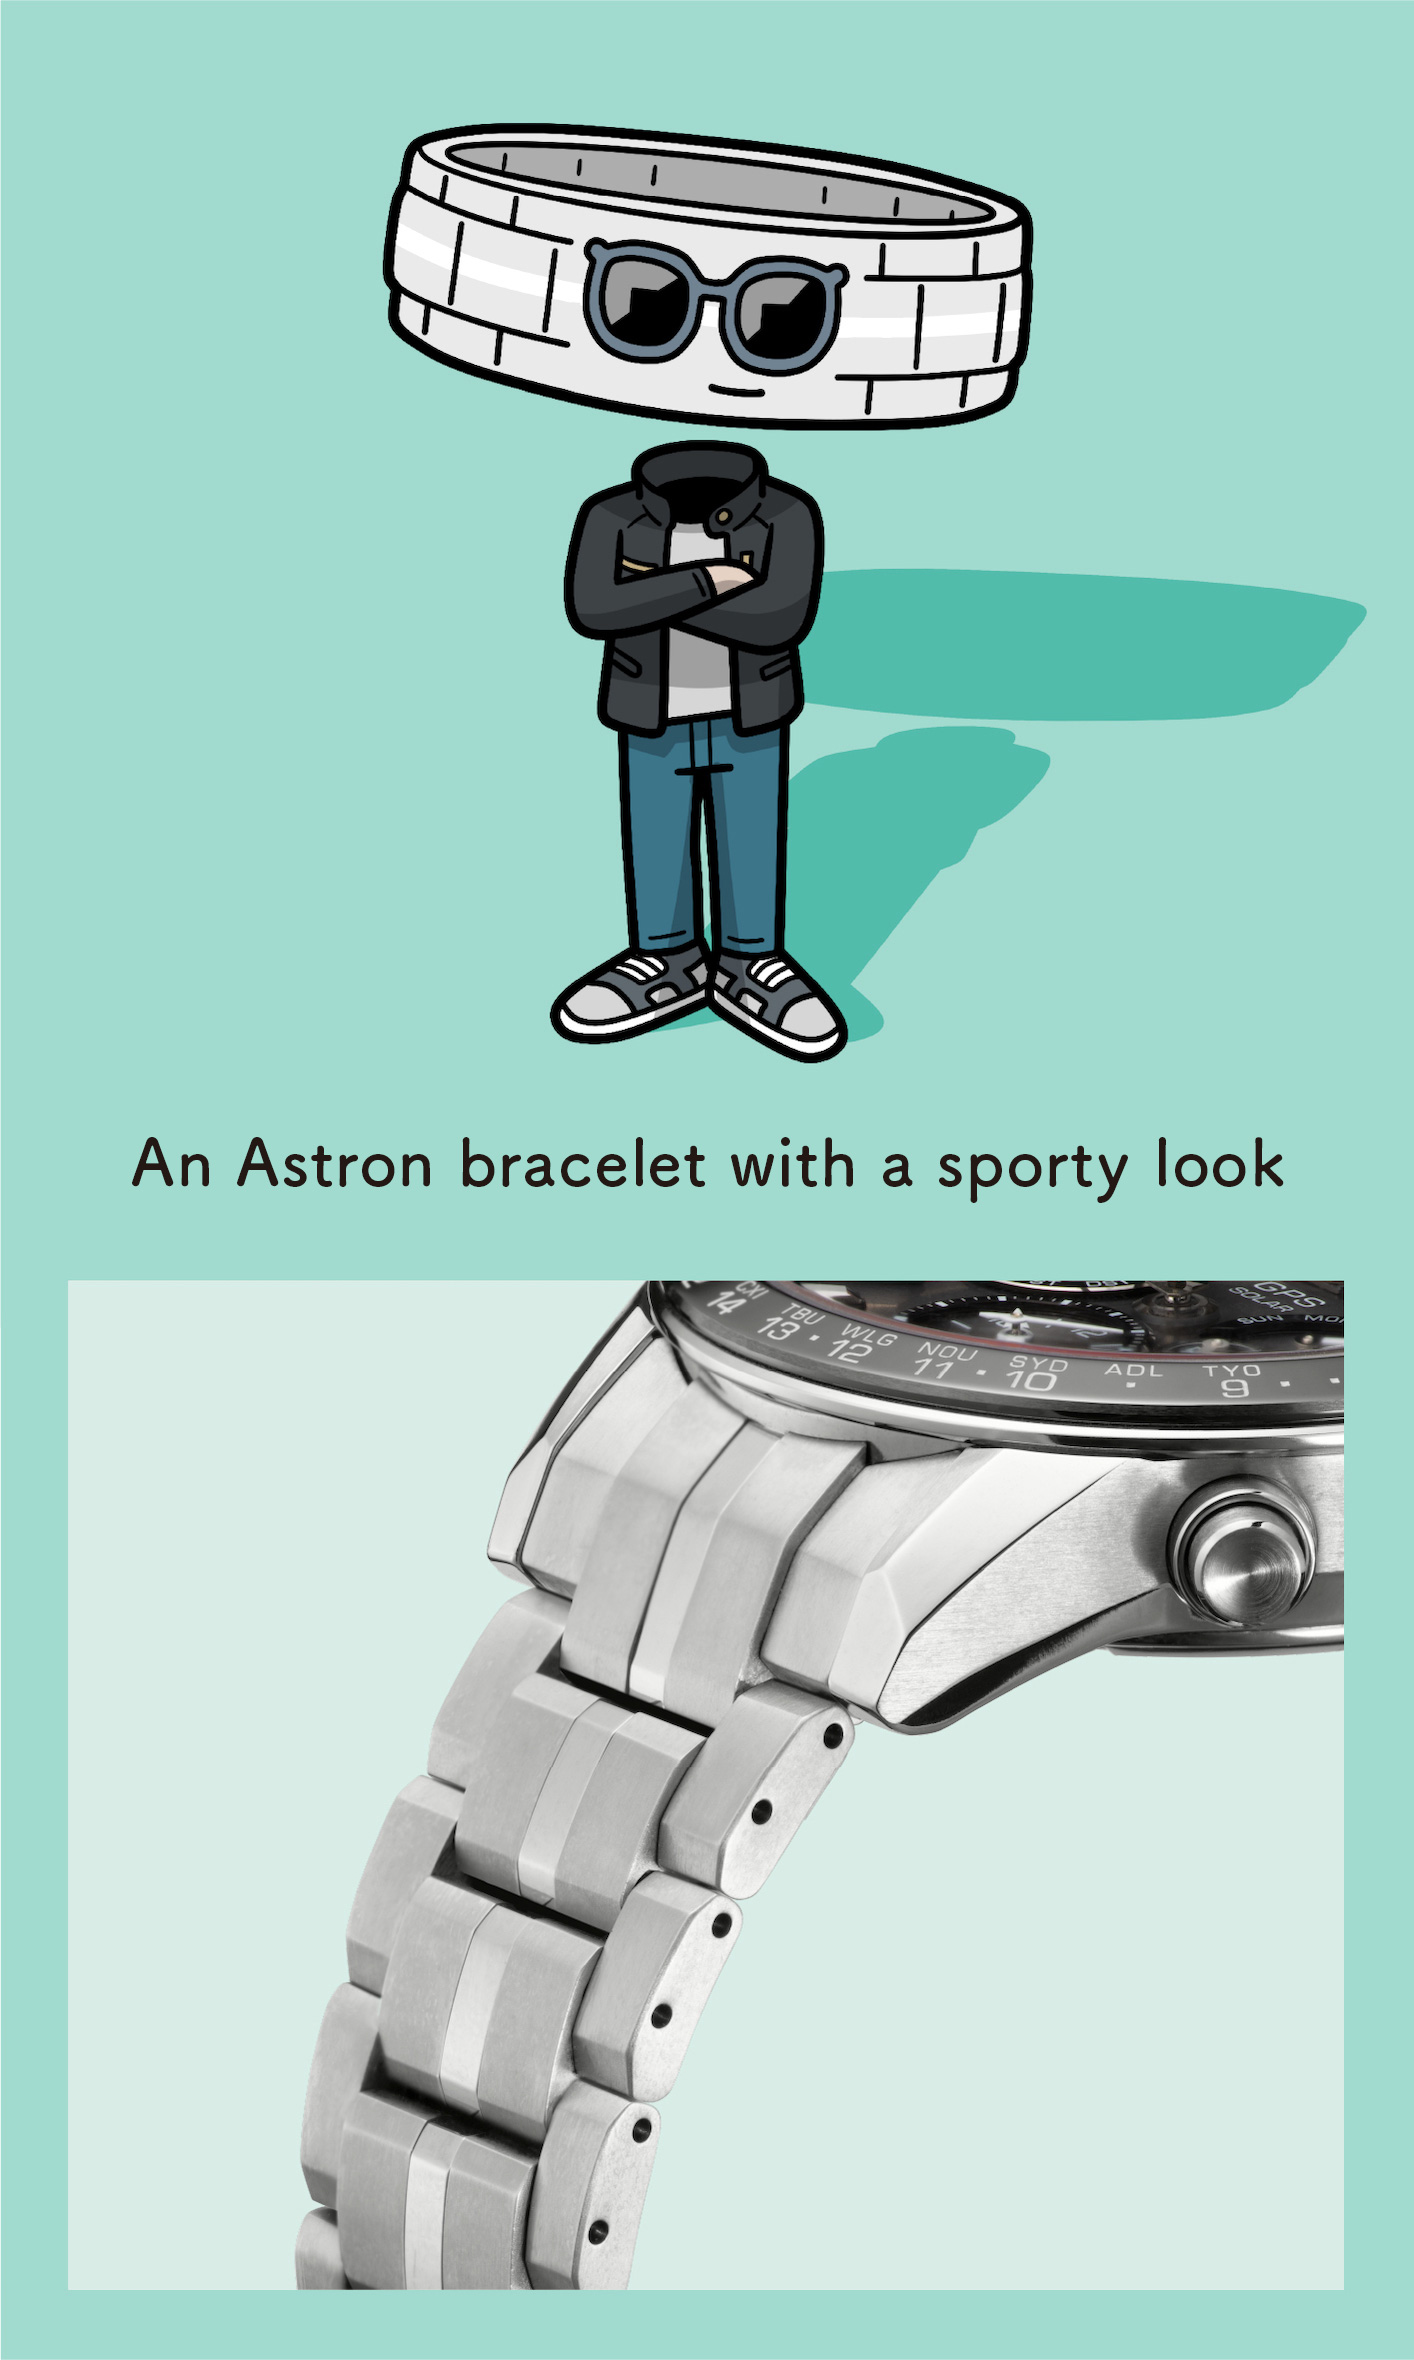 An Astron bracelet with a sporty look (Enlarged photo of the bracelet)